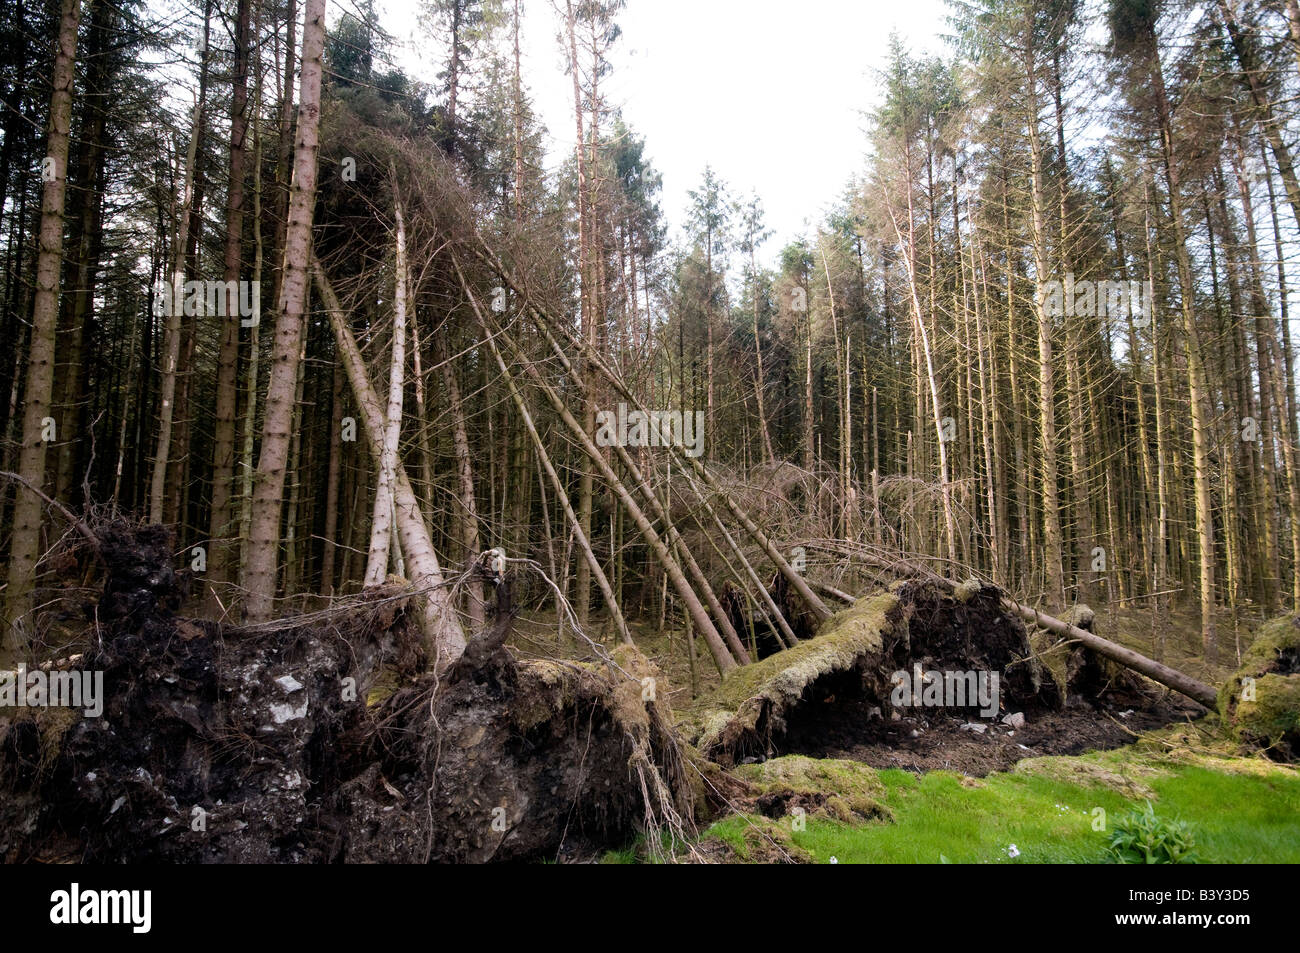 Fallen tree and roots in middle of pine forest, Gortin Glen Forest Park, Ulster, Northern Ireland Stock Photo